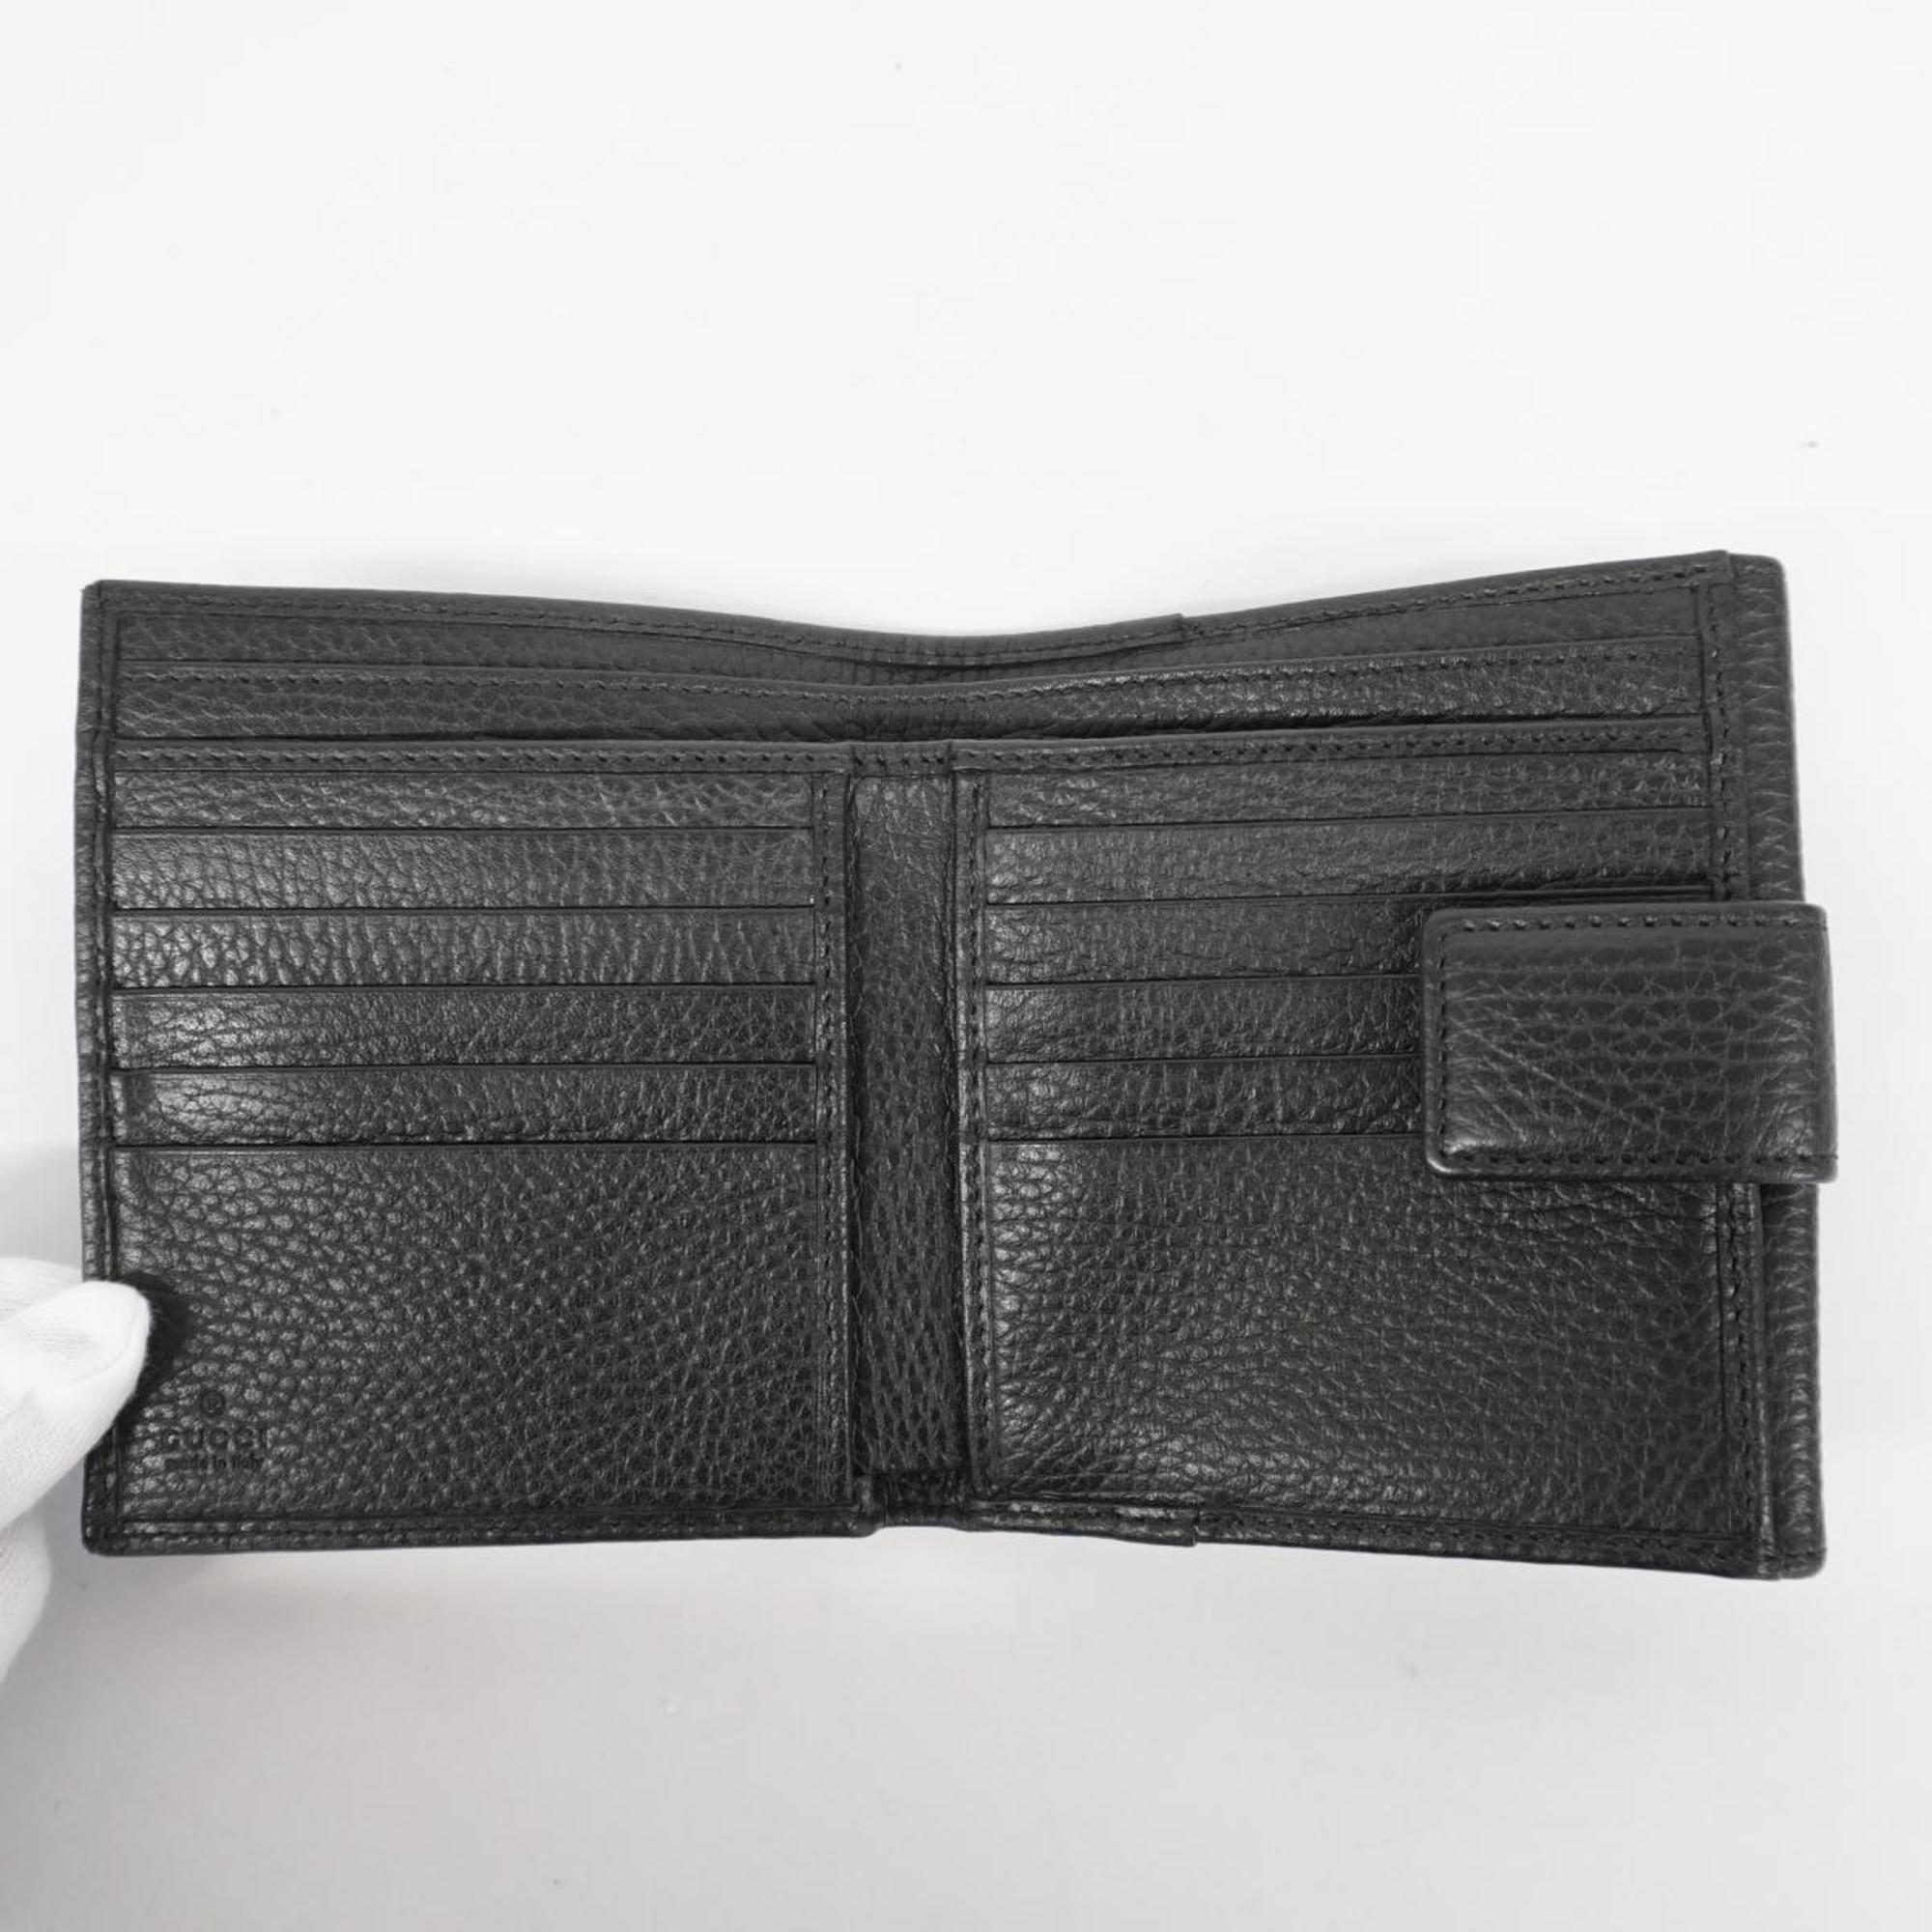 Gucci Wallet GG Marmont 456122 Leather Black Women's